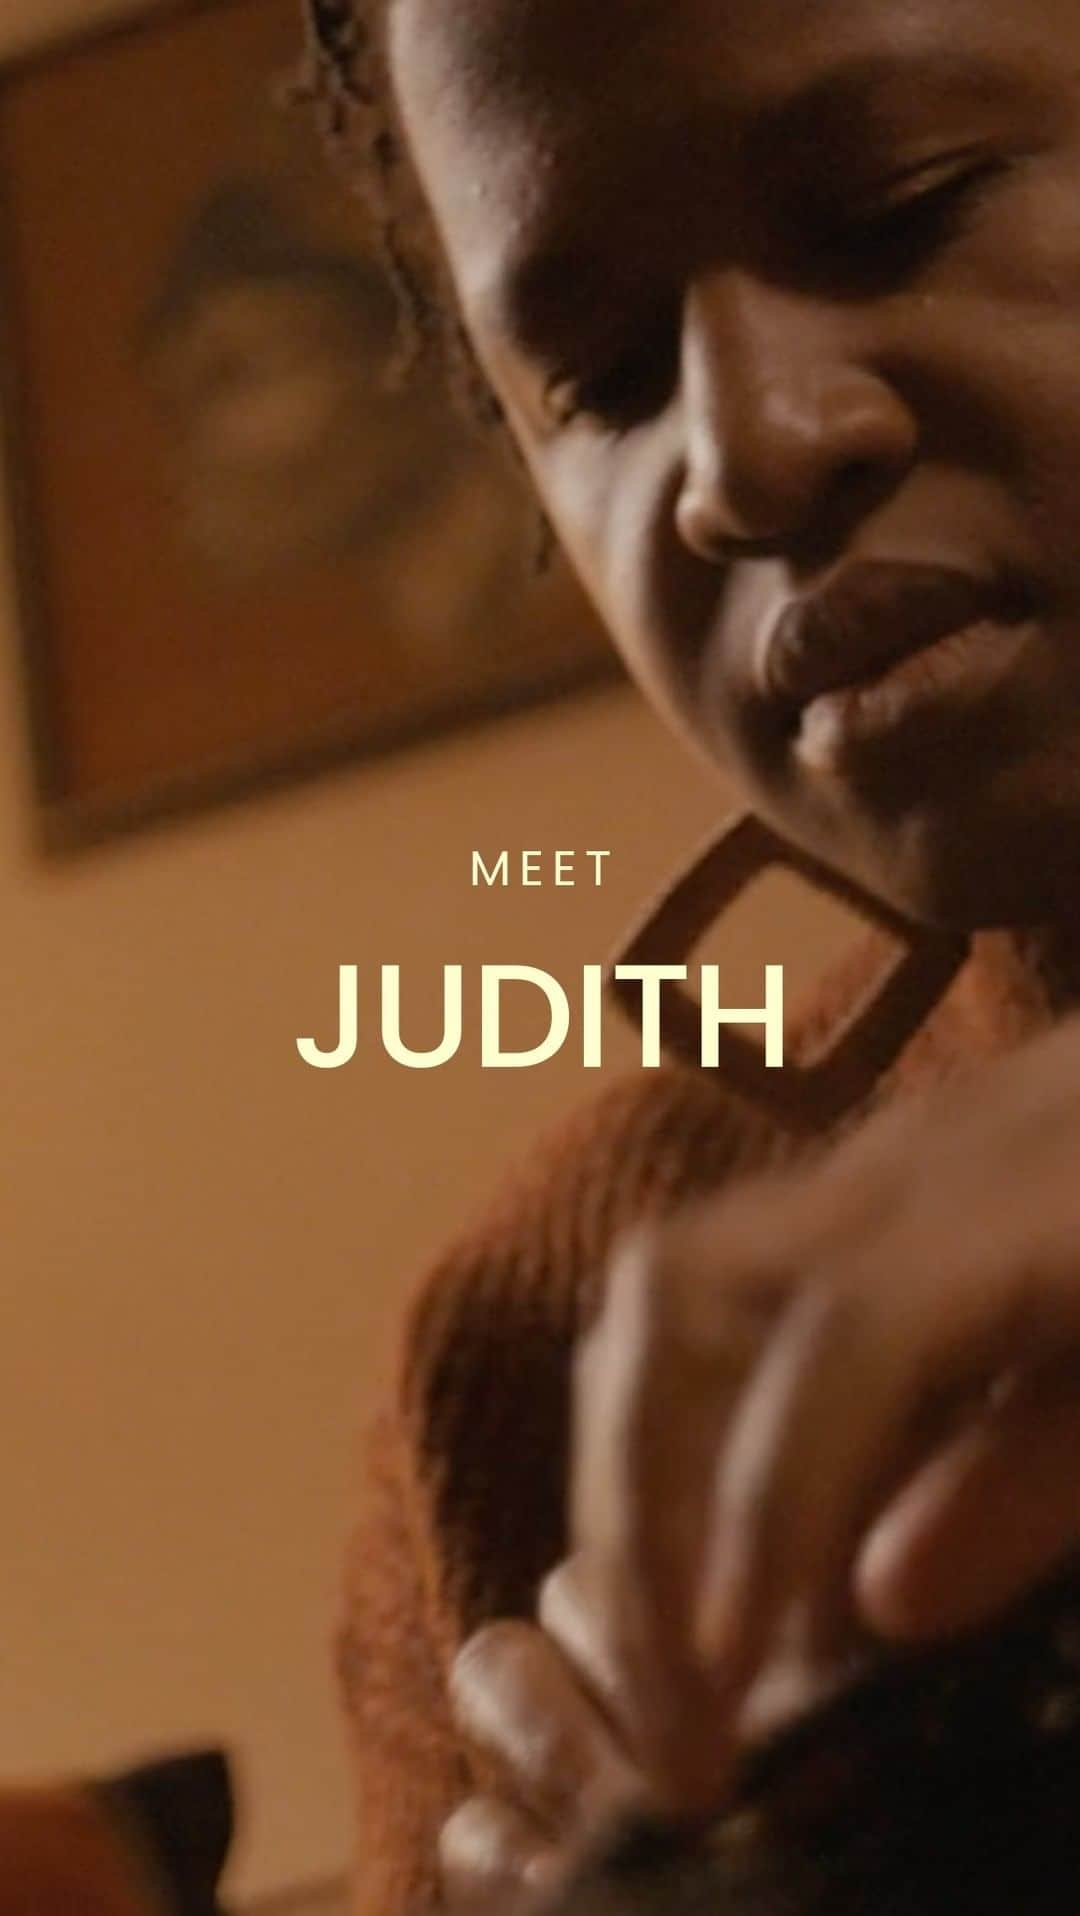 LUSH Cosmeticsのインスタグラム：「Warning: This video contains talk of physical violence, which may be harmful or traumatizing to some.   "Because my hair experience was so traumatic when I was growing up, I was very determined that they [her daughters] wouldn't have that experience." –Judith   Watch Judith share her own natural hair journey, directed by the award-winning @aliciakharris_.   Watch Naturally, the full documentary: https://youtu.be/QS5F5i3oS3M  Take action to support The Crown Act and end hair discrimination:  USA: https://p2a.co/ueUtBN3 CDN: https://p2a.co/tuekkv4   #hair #curls #naturalhair #Blackhair #Blackhistory #selflove #Blackisbeautiful」